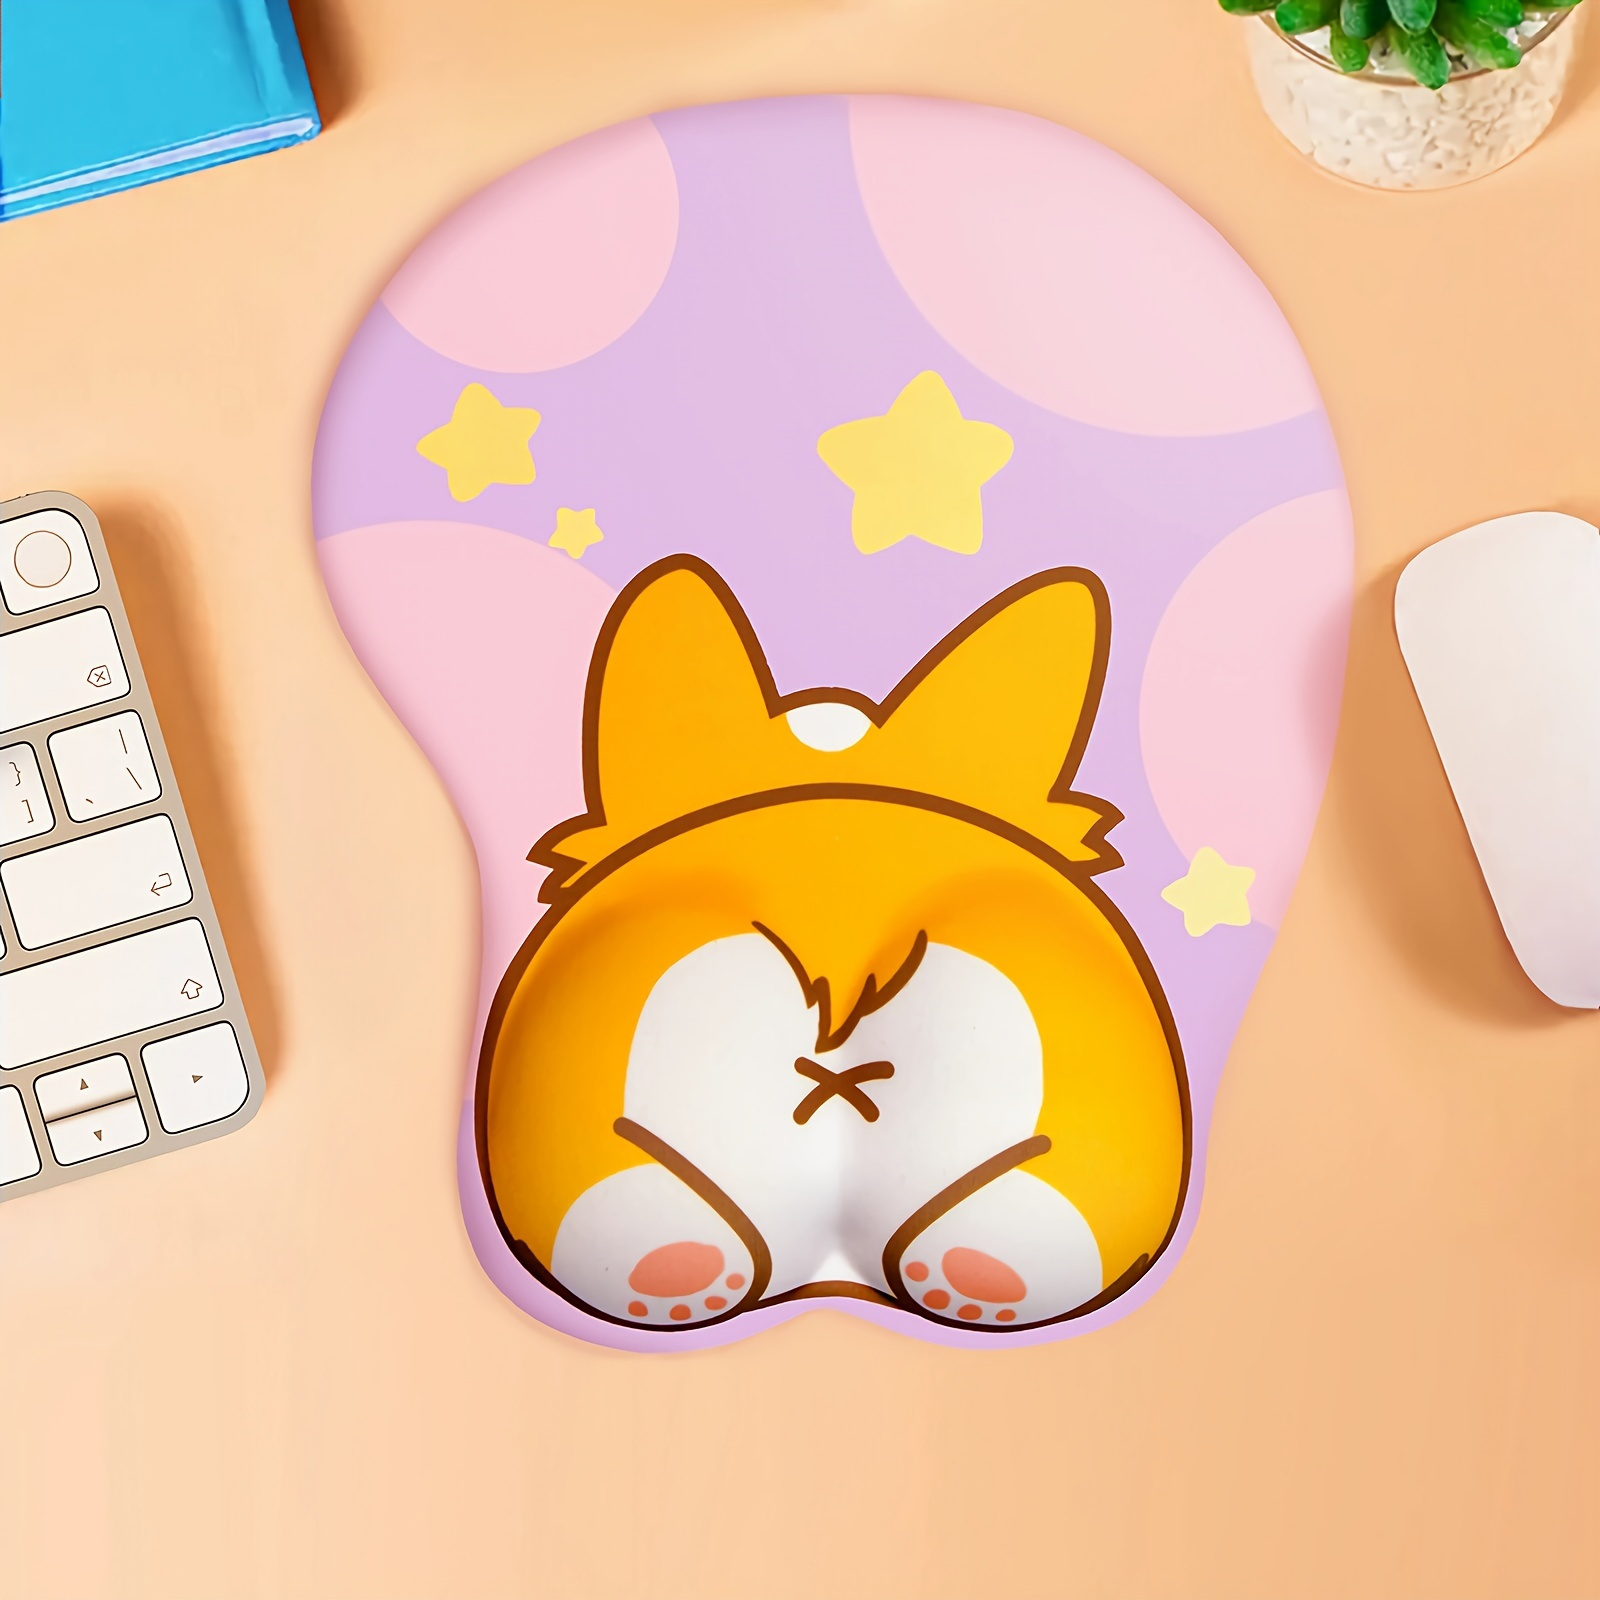 HAOCOO Ergonomic Mouse Pad with Wrist Support,Non-Slip Backing Corgi Anime  Cute Gel Mouse Pad Wrist Rest, Easy-Typing and Pain Relief for Gaming